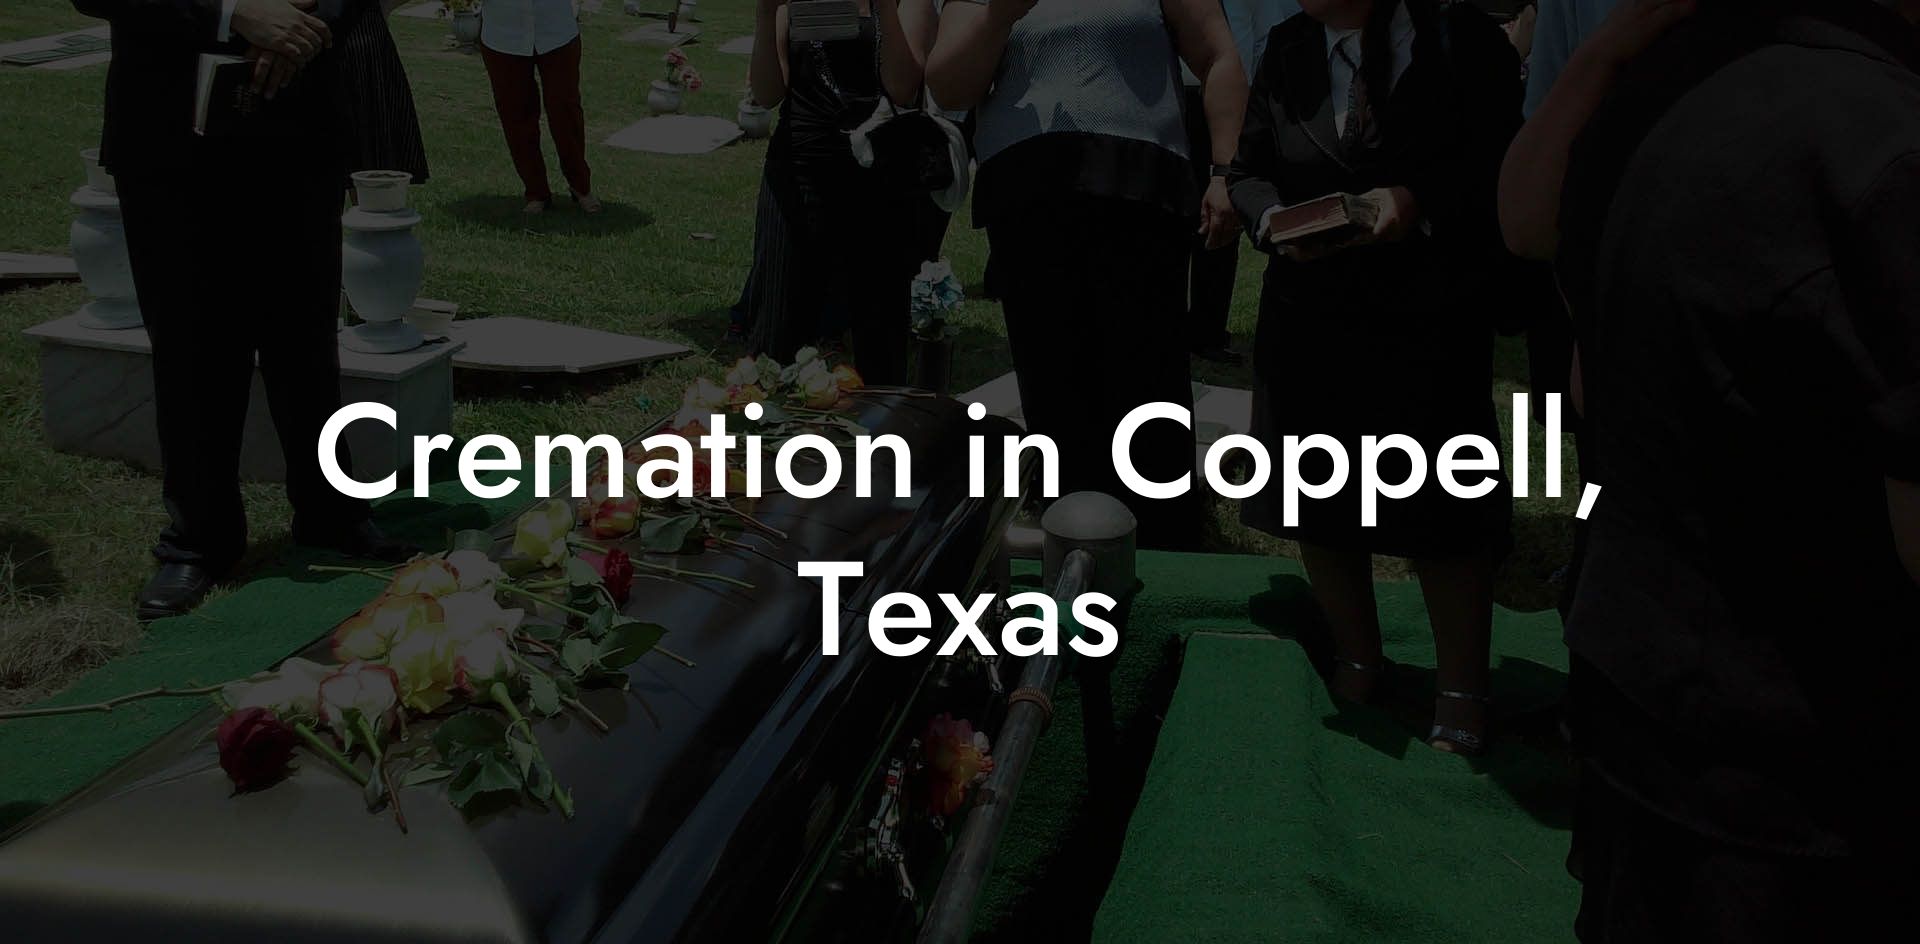 Cremation in Coppell, Texas